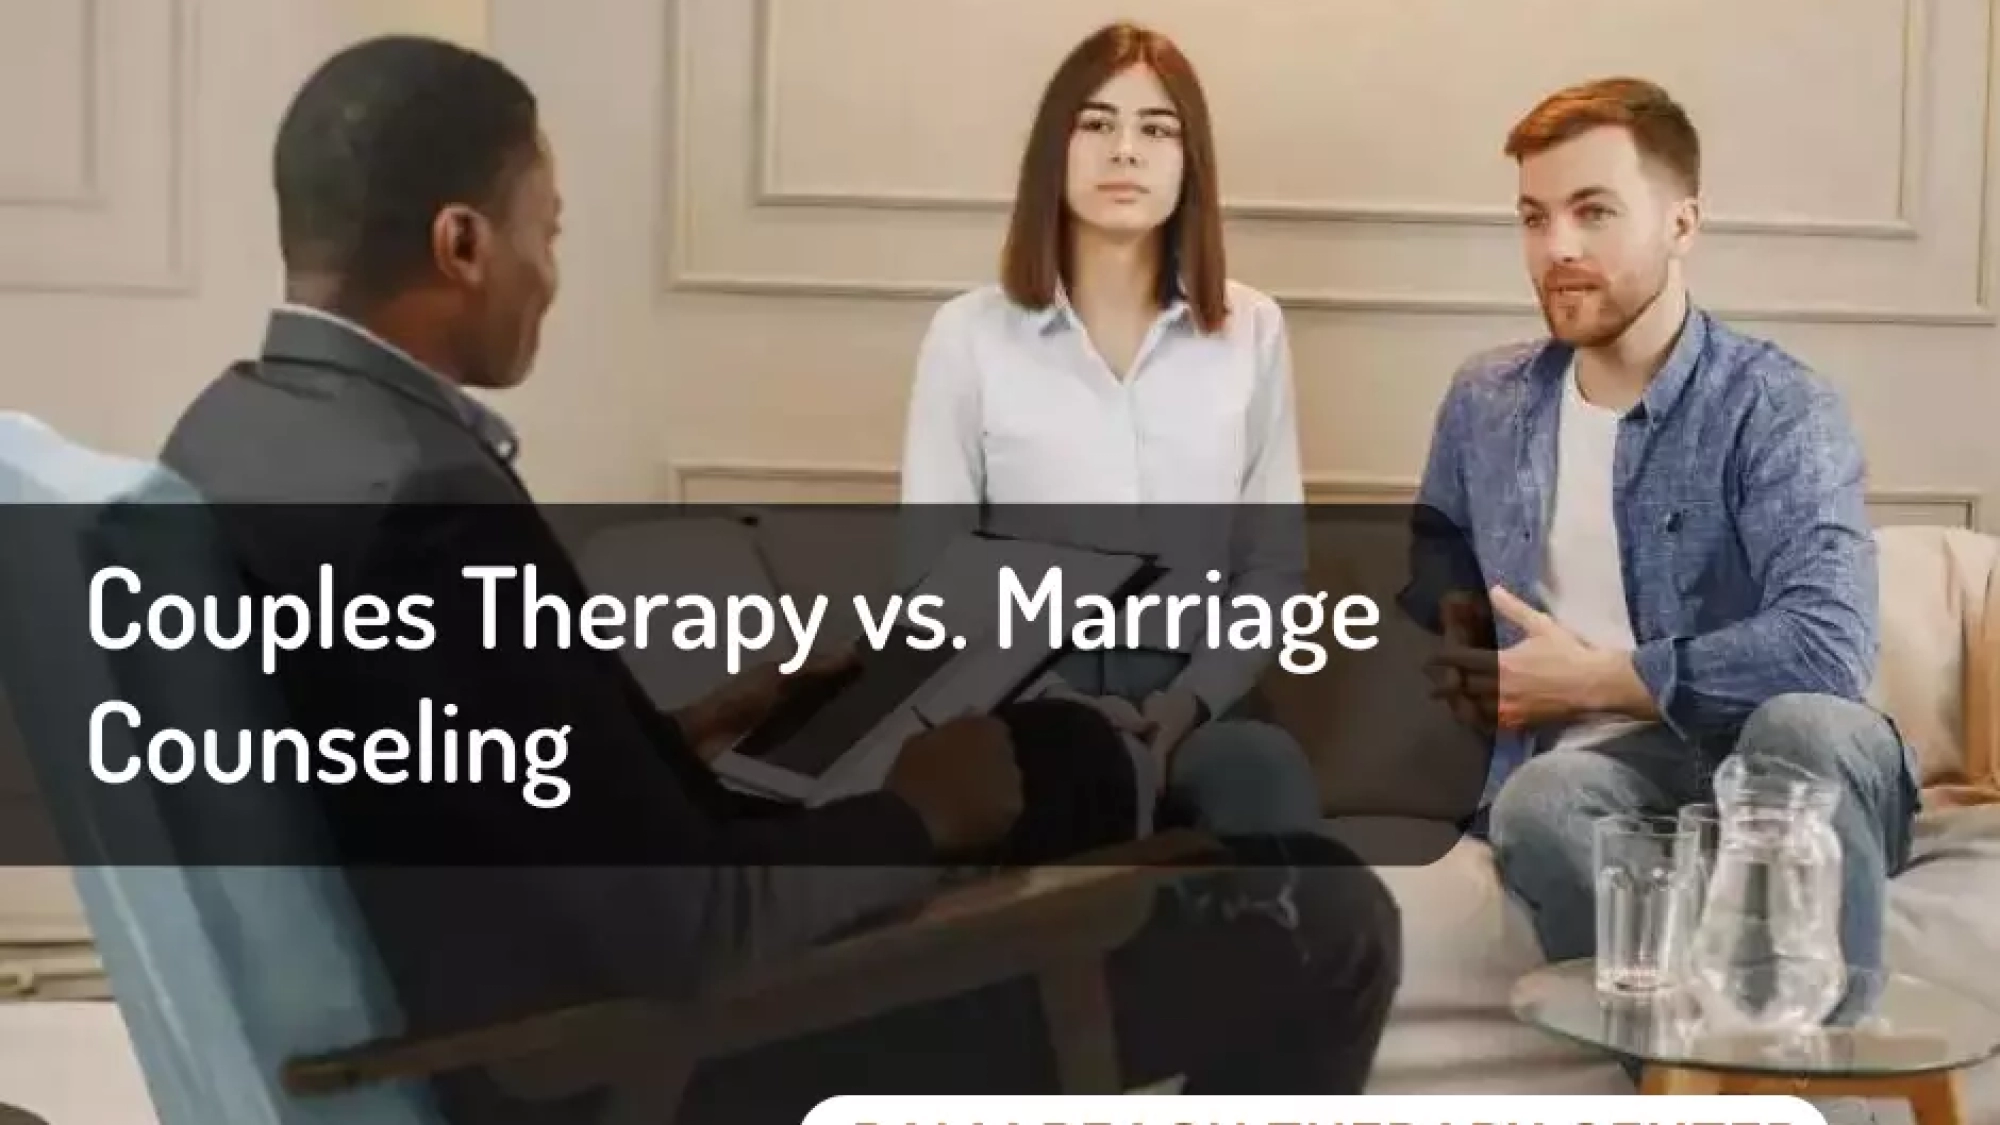 Decoding the Difference: Couples Therapy vs. Marriage Counseling